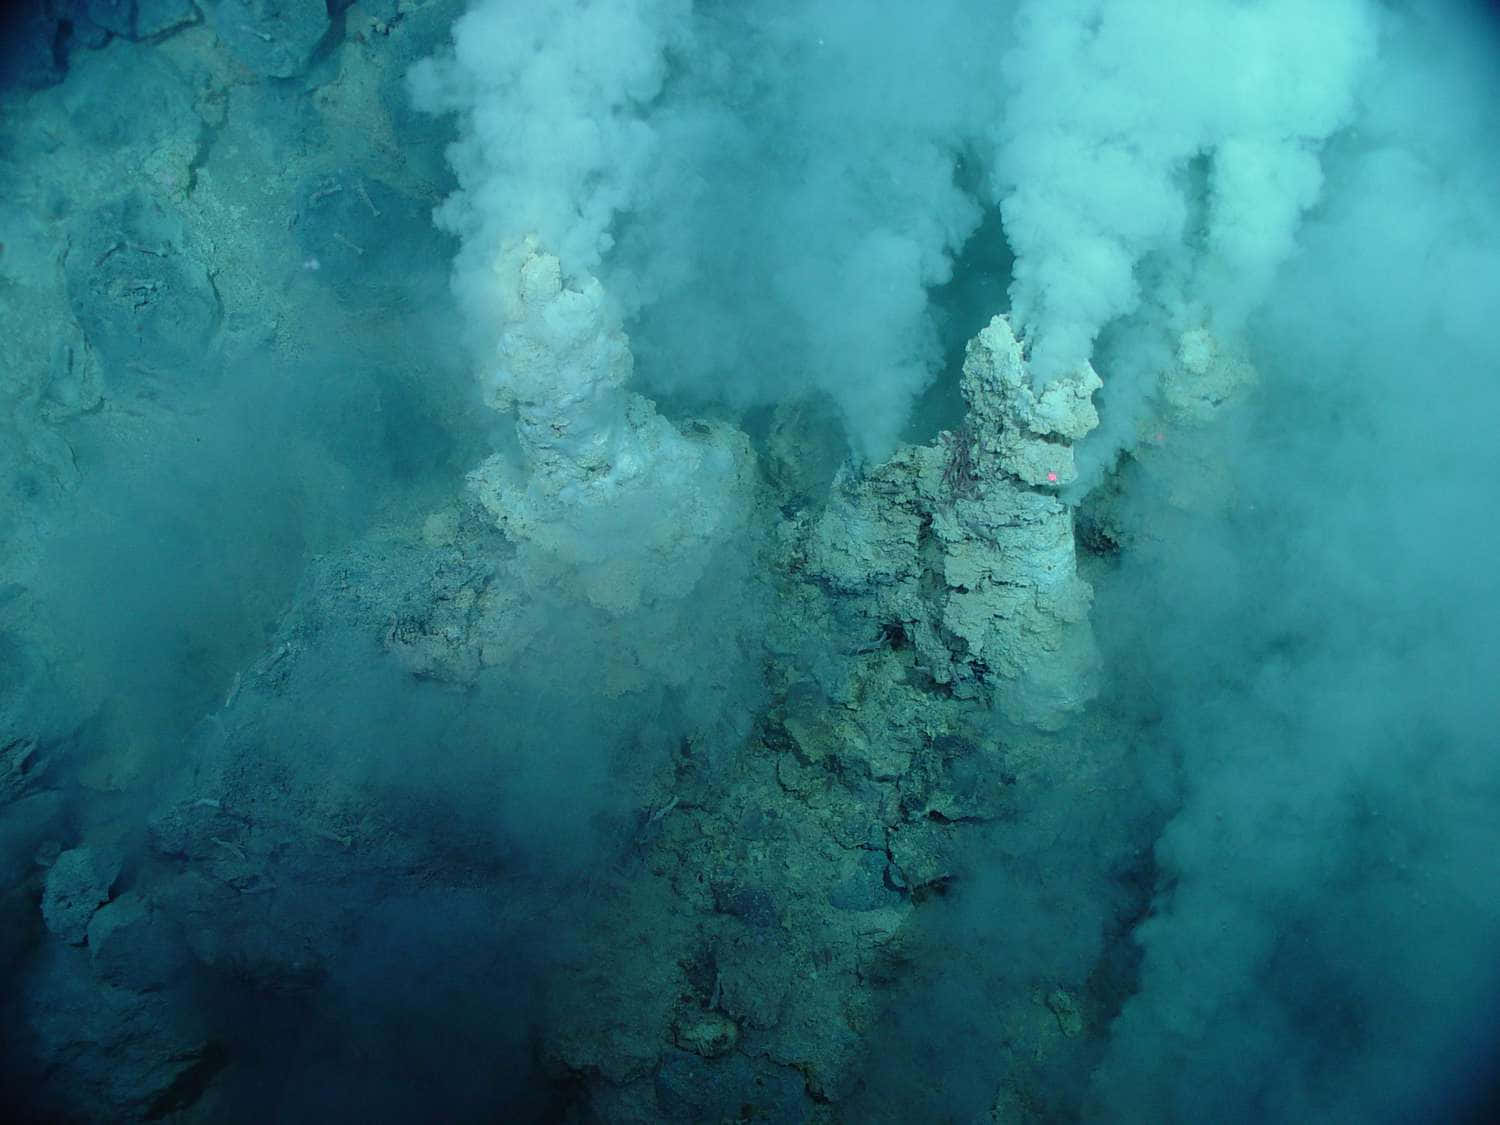 A View Of A Large Crater With Steam Coming Out Of It